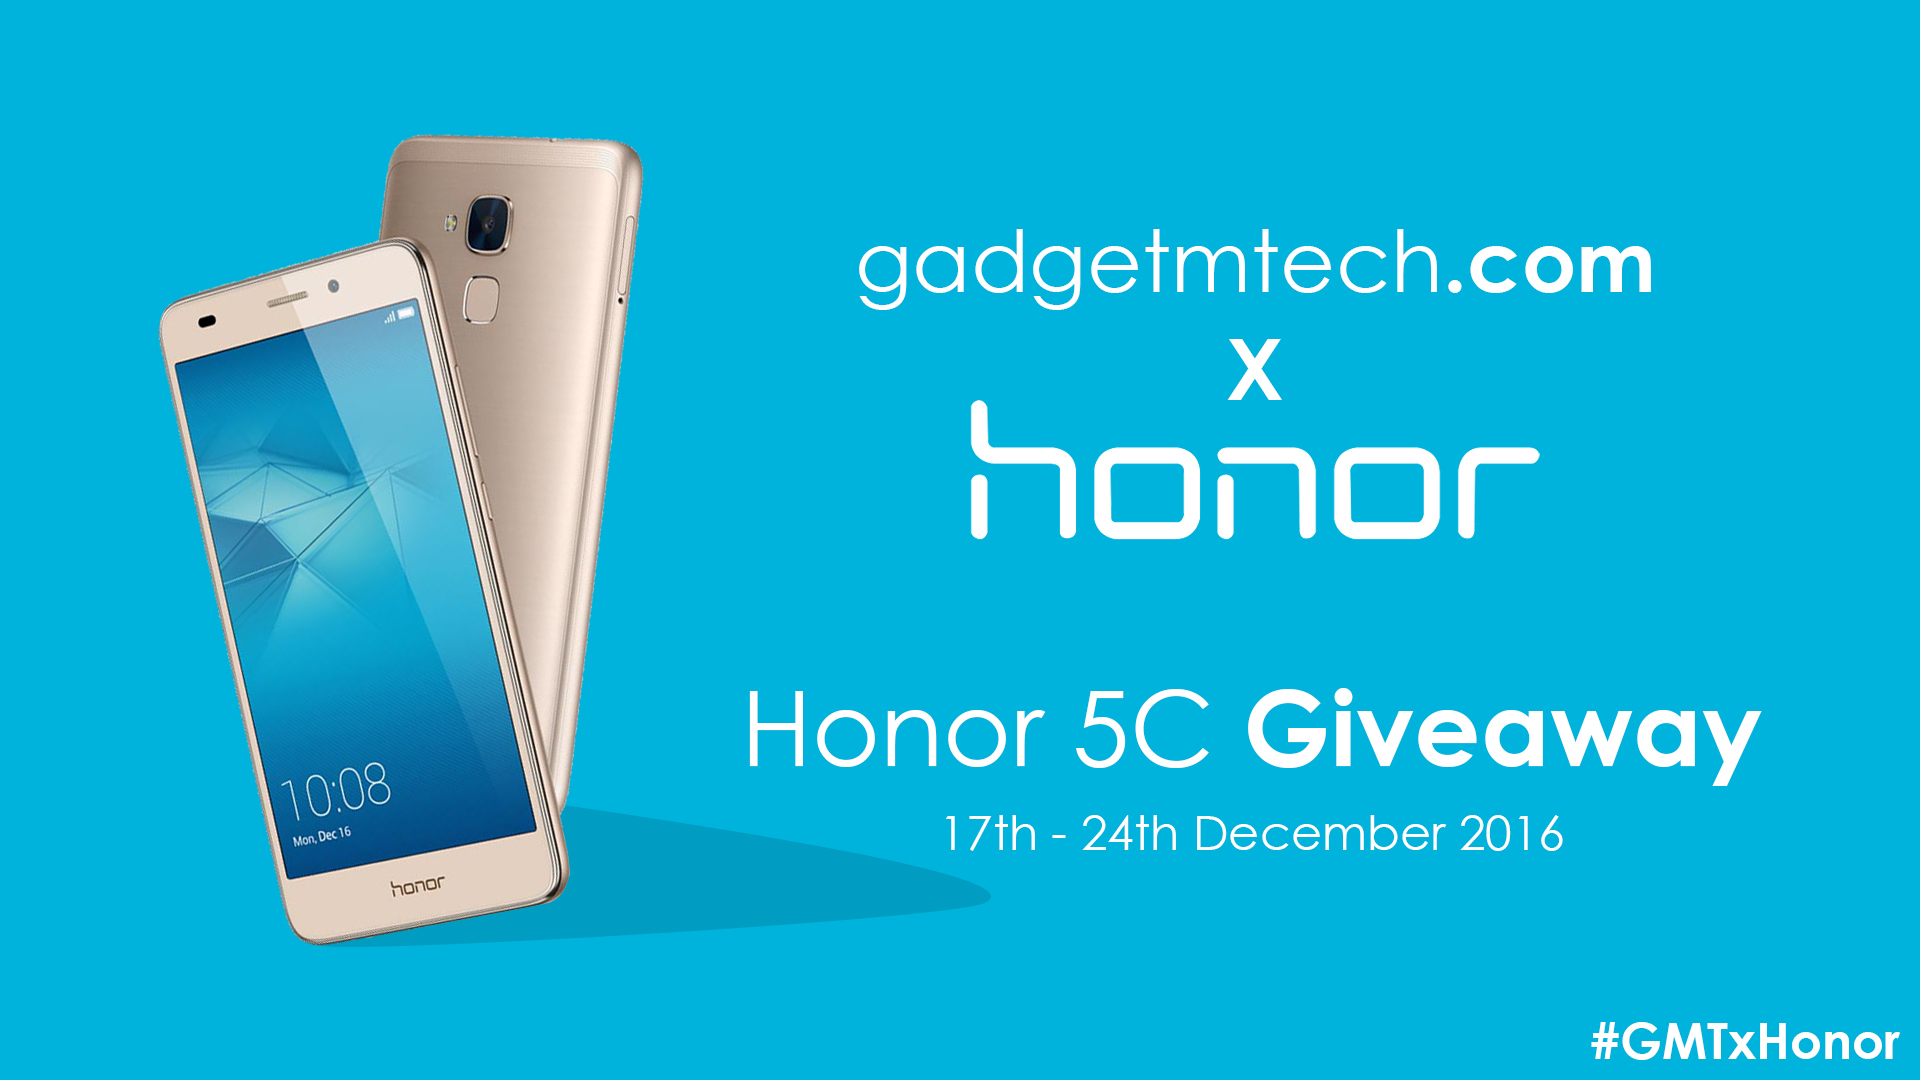 #GMTxHonor Giveaway: Honor 5C